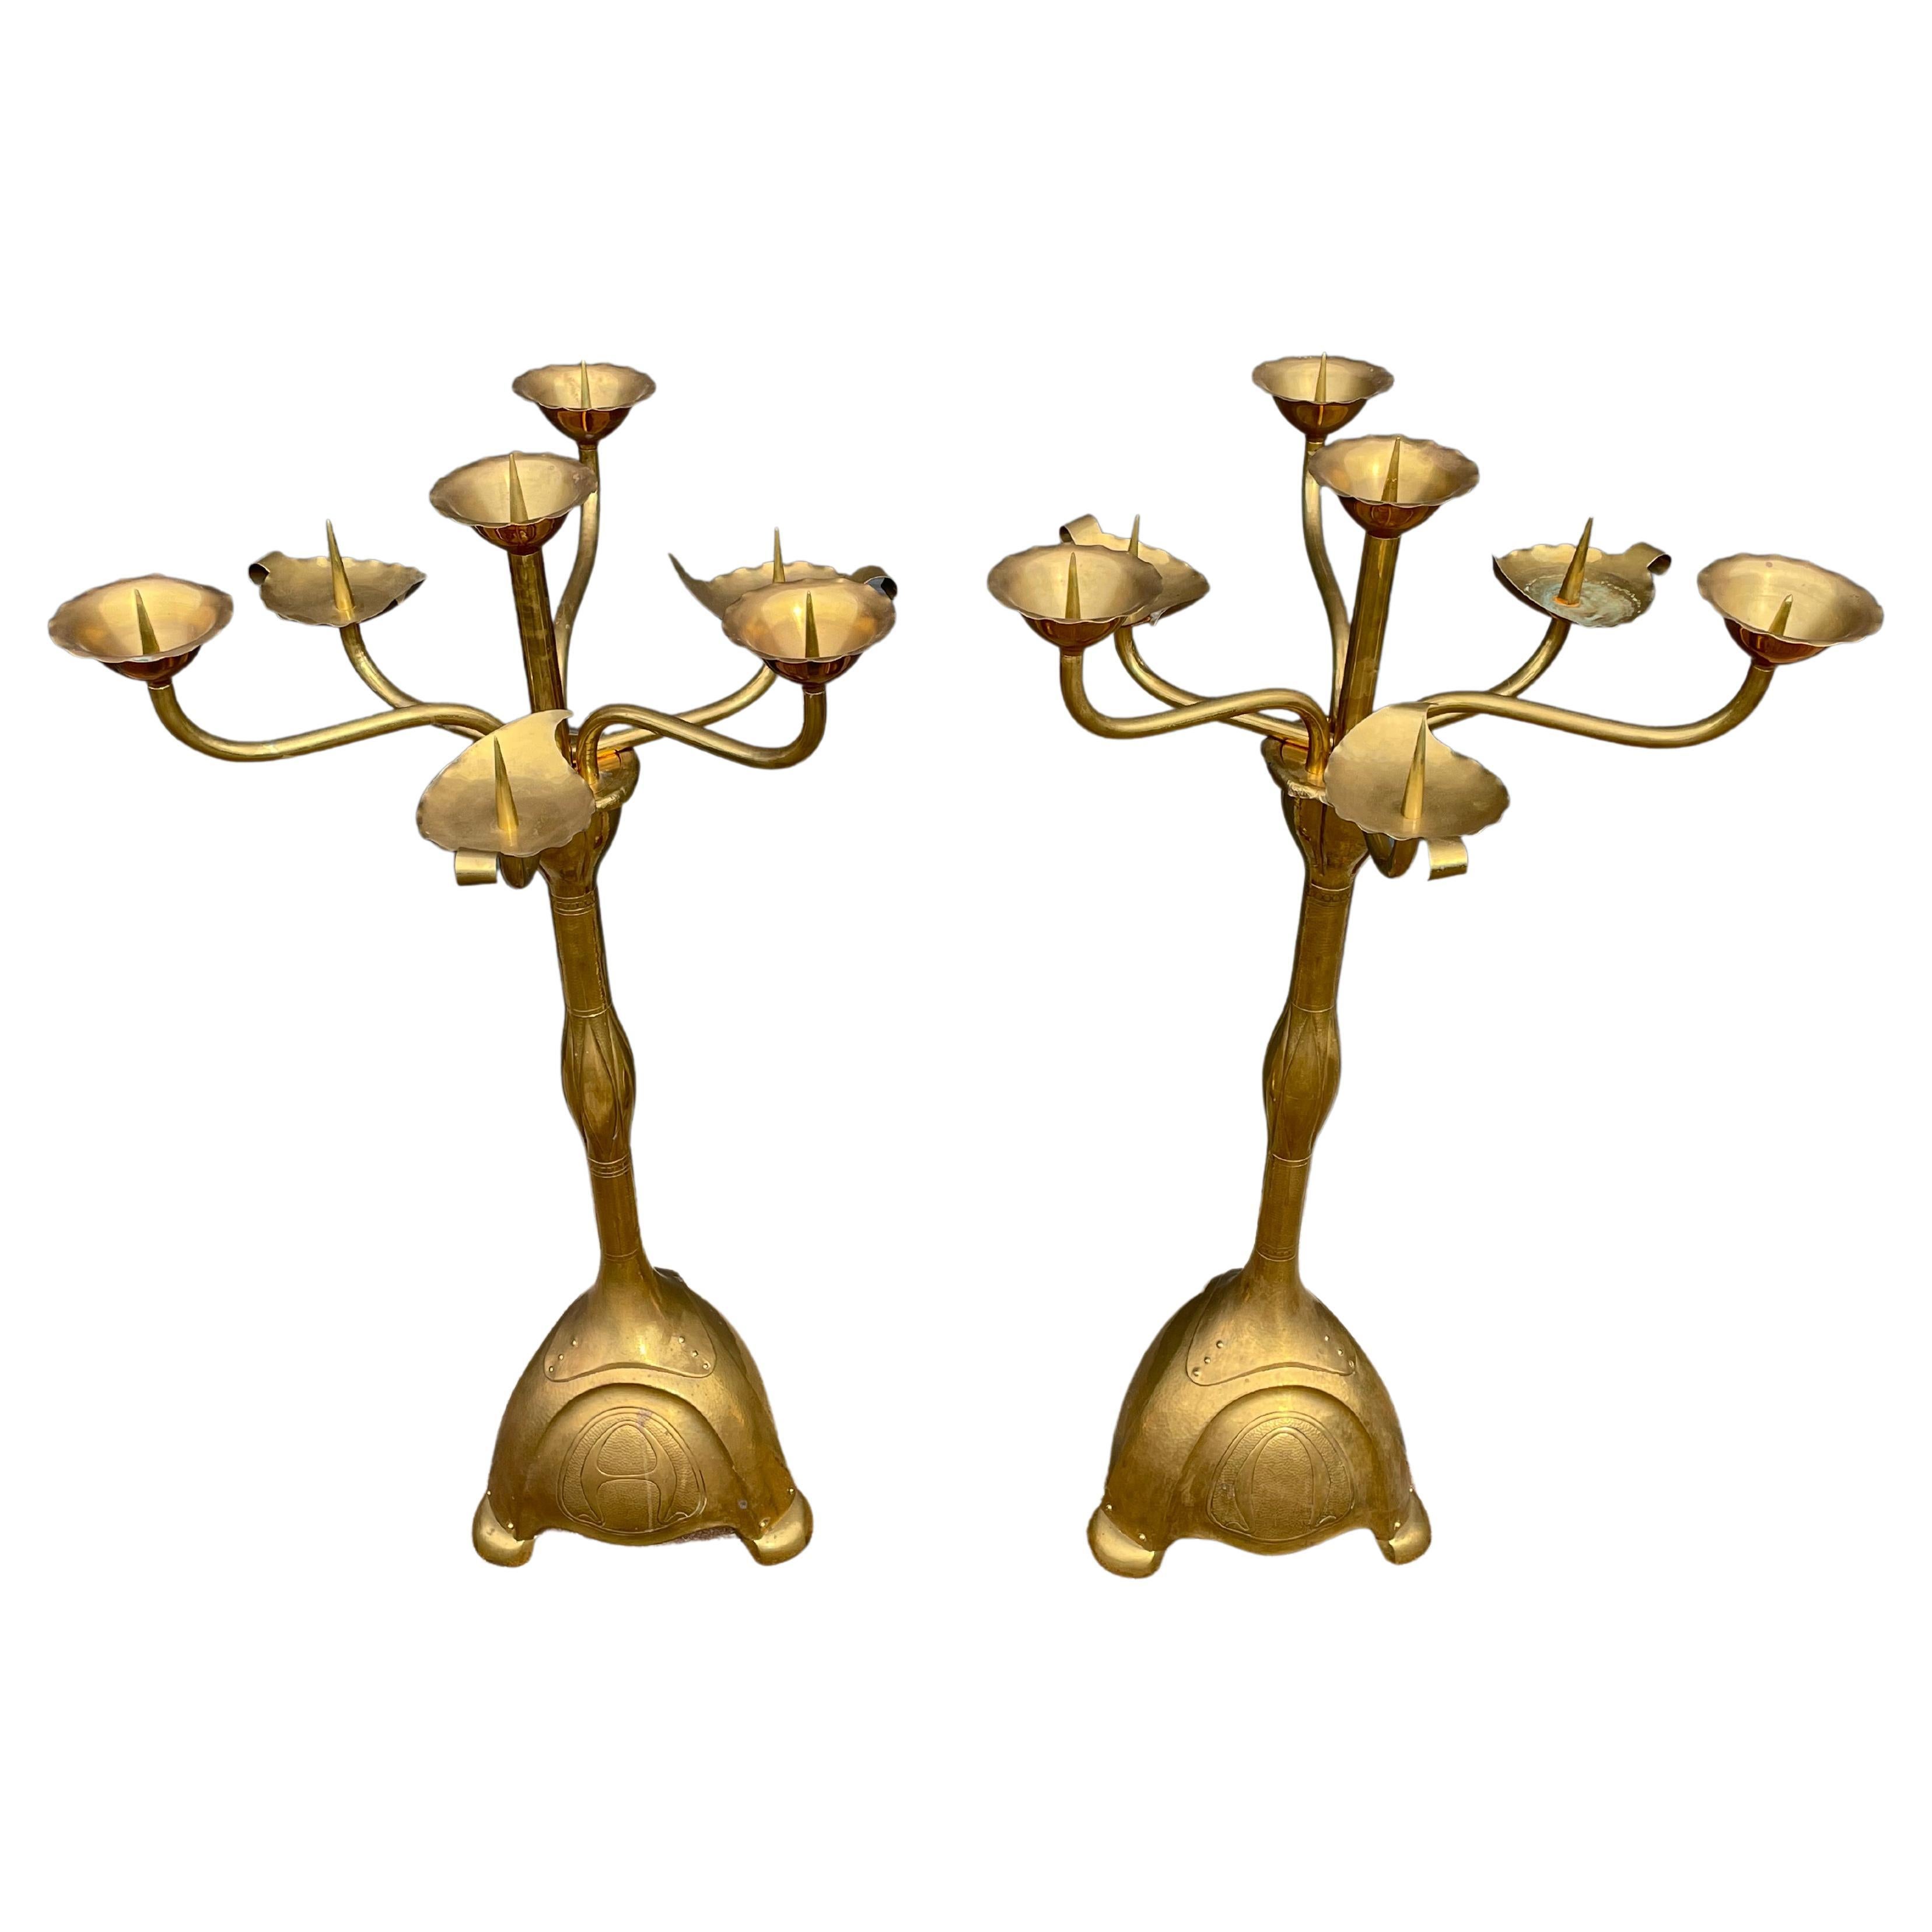 Largest Pair of Arts and Crafts Floor Candle Holders / Alpha & Omega Candelabras For Sale